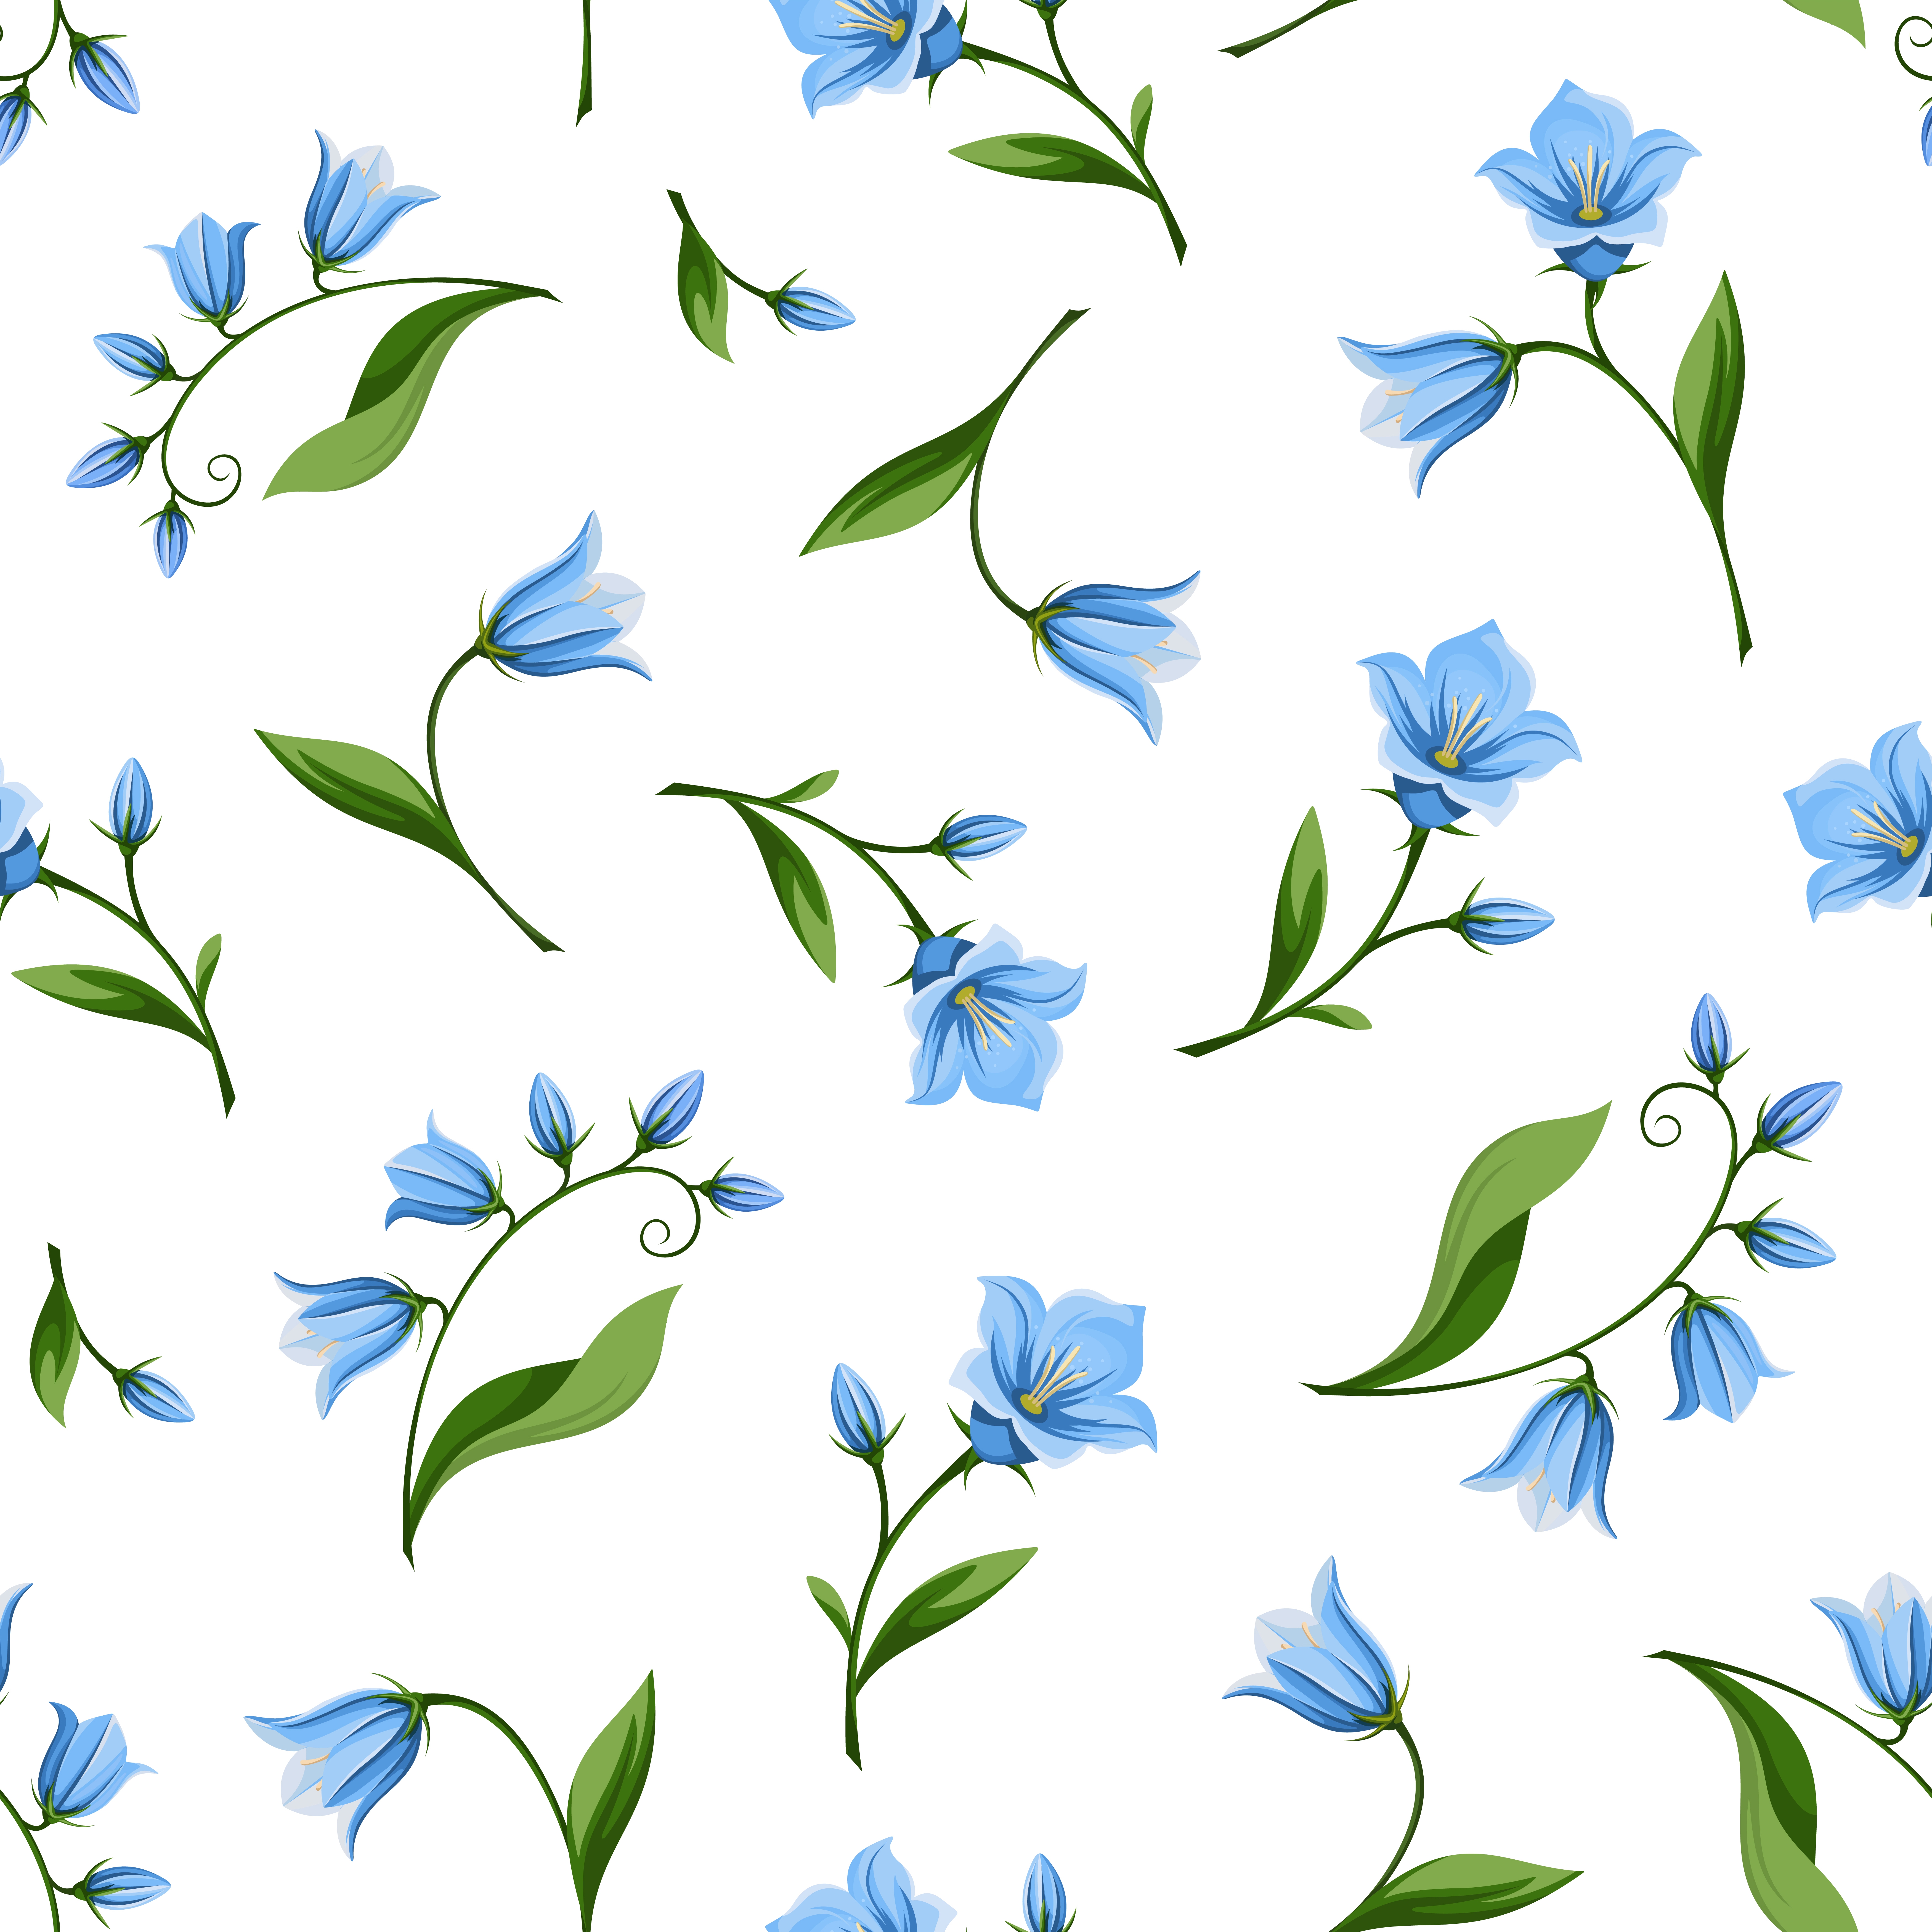 Seamless pattern with bluebell flowers. illustration.